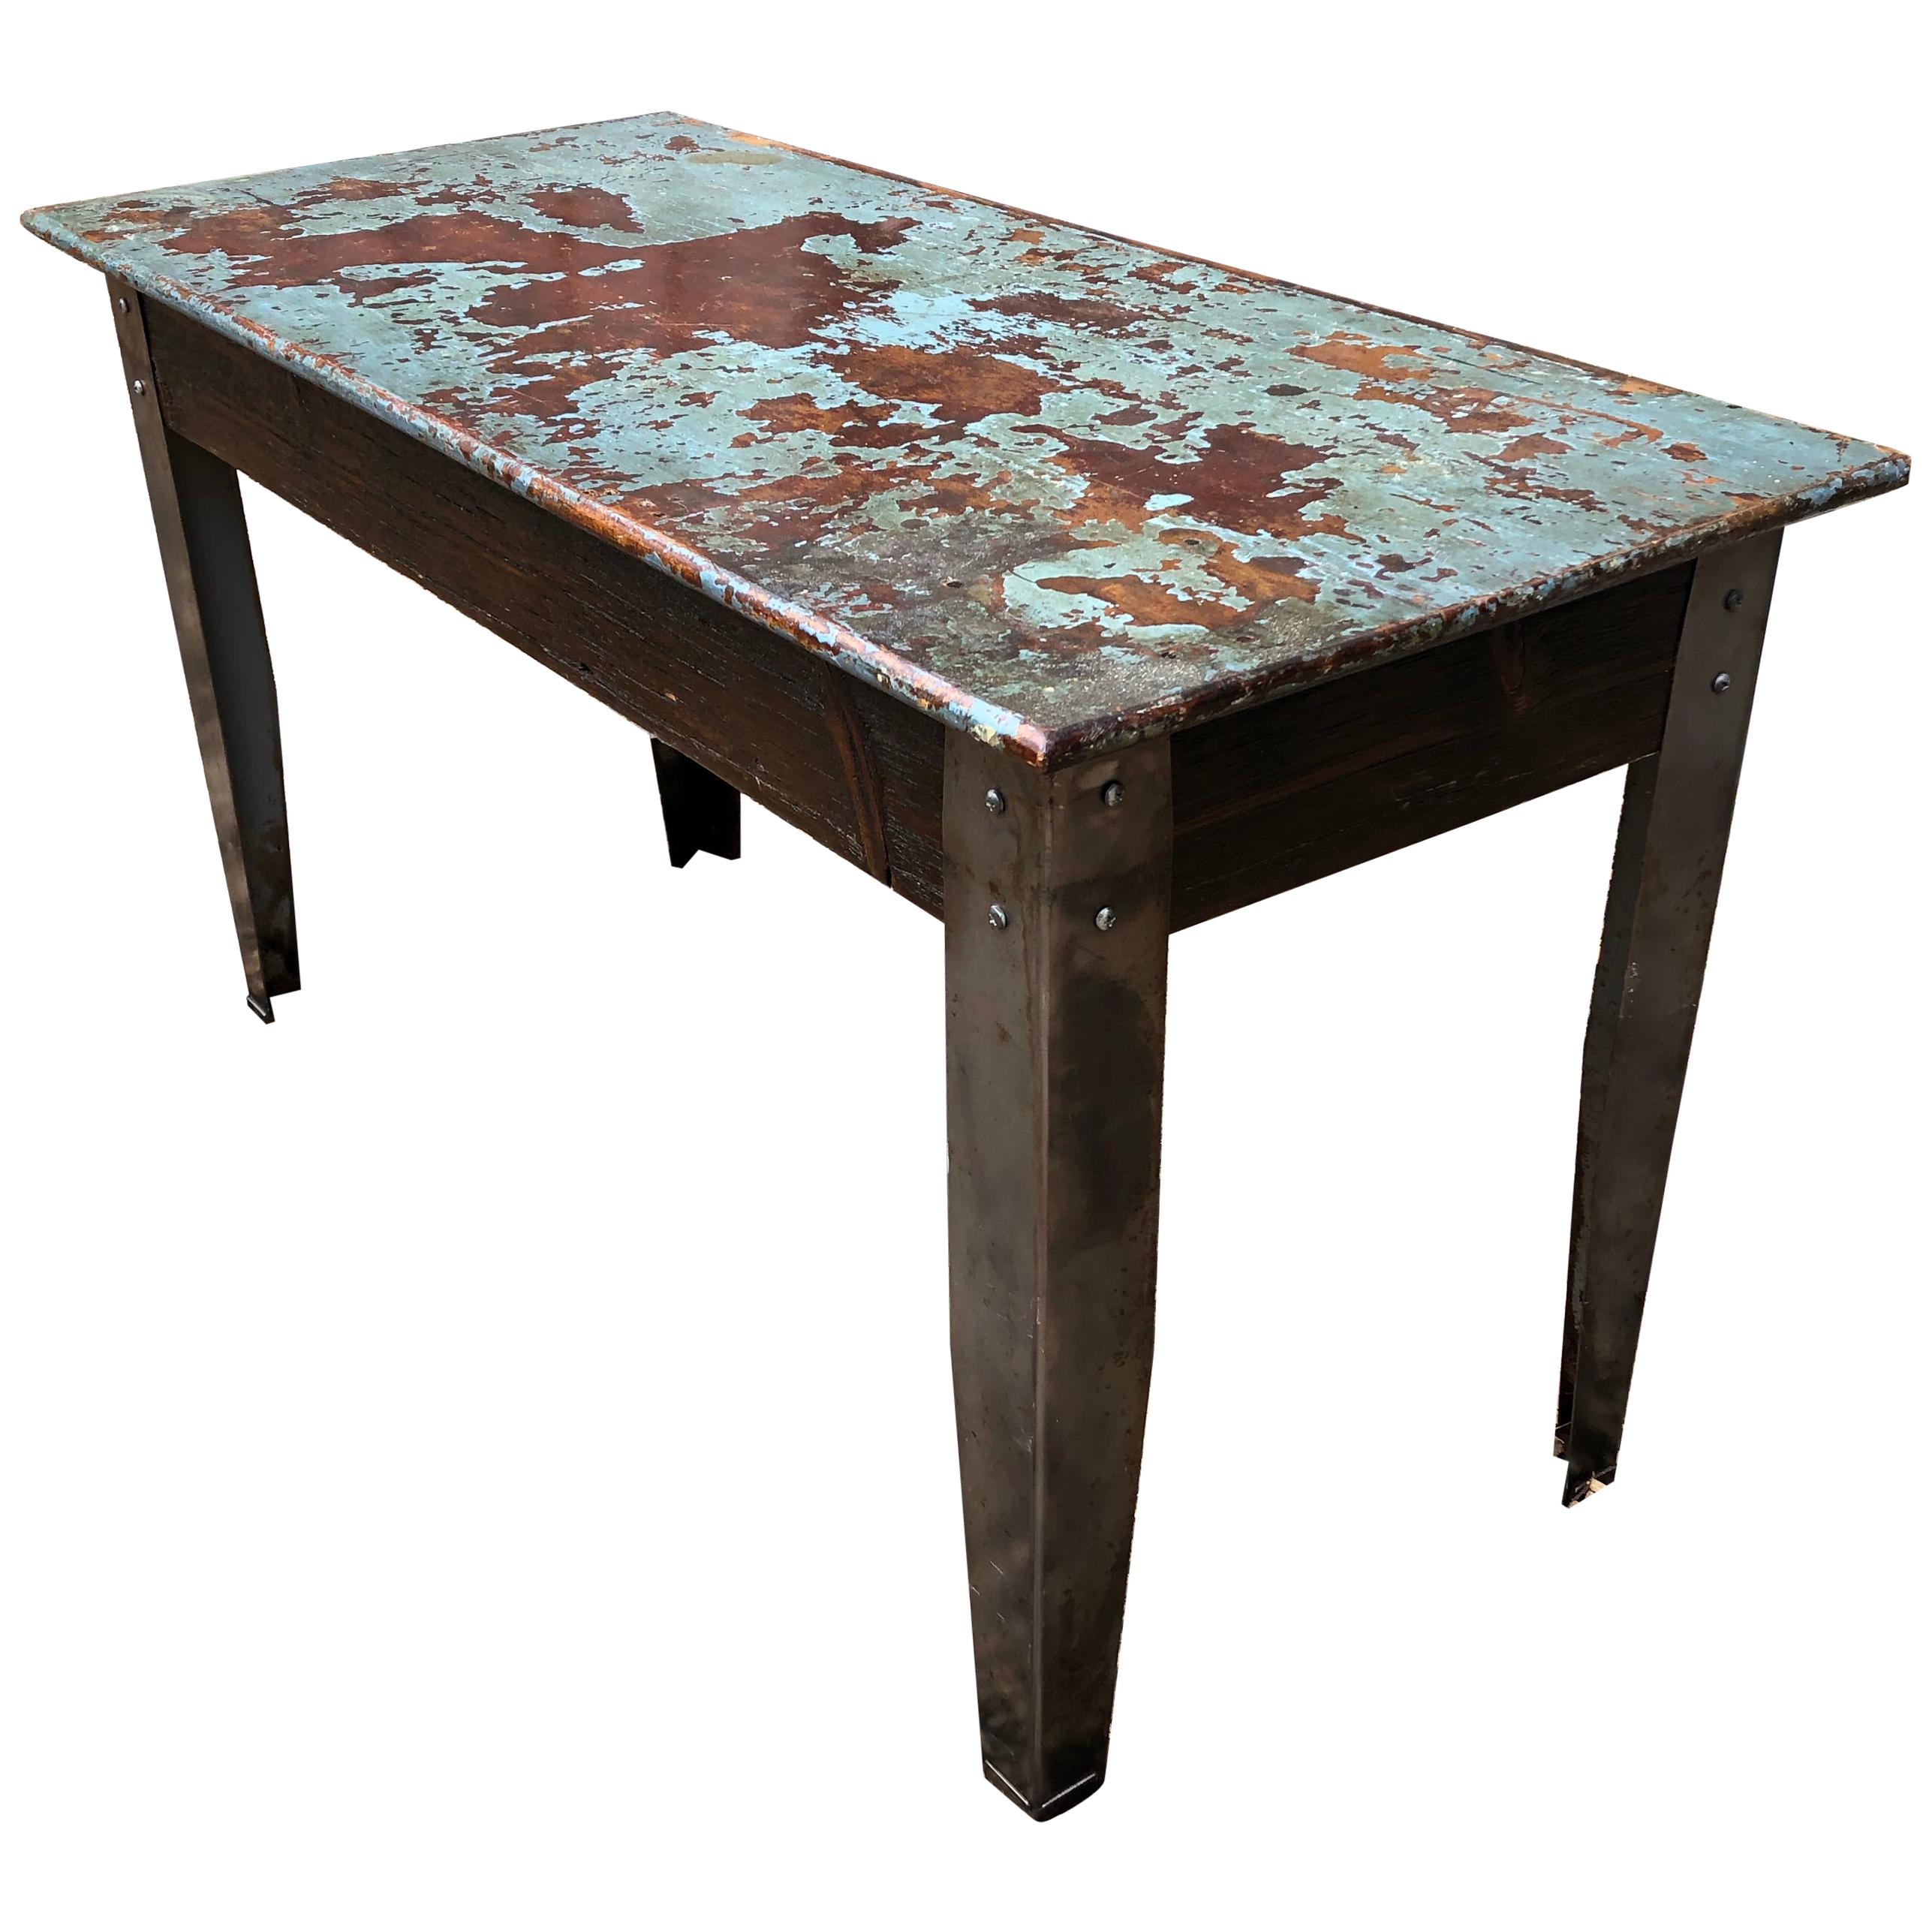 Cool Industrial Distressed Wood Table with Metal Legs For Sale